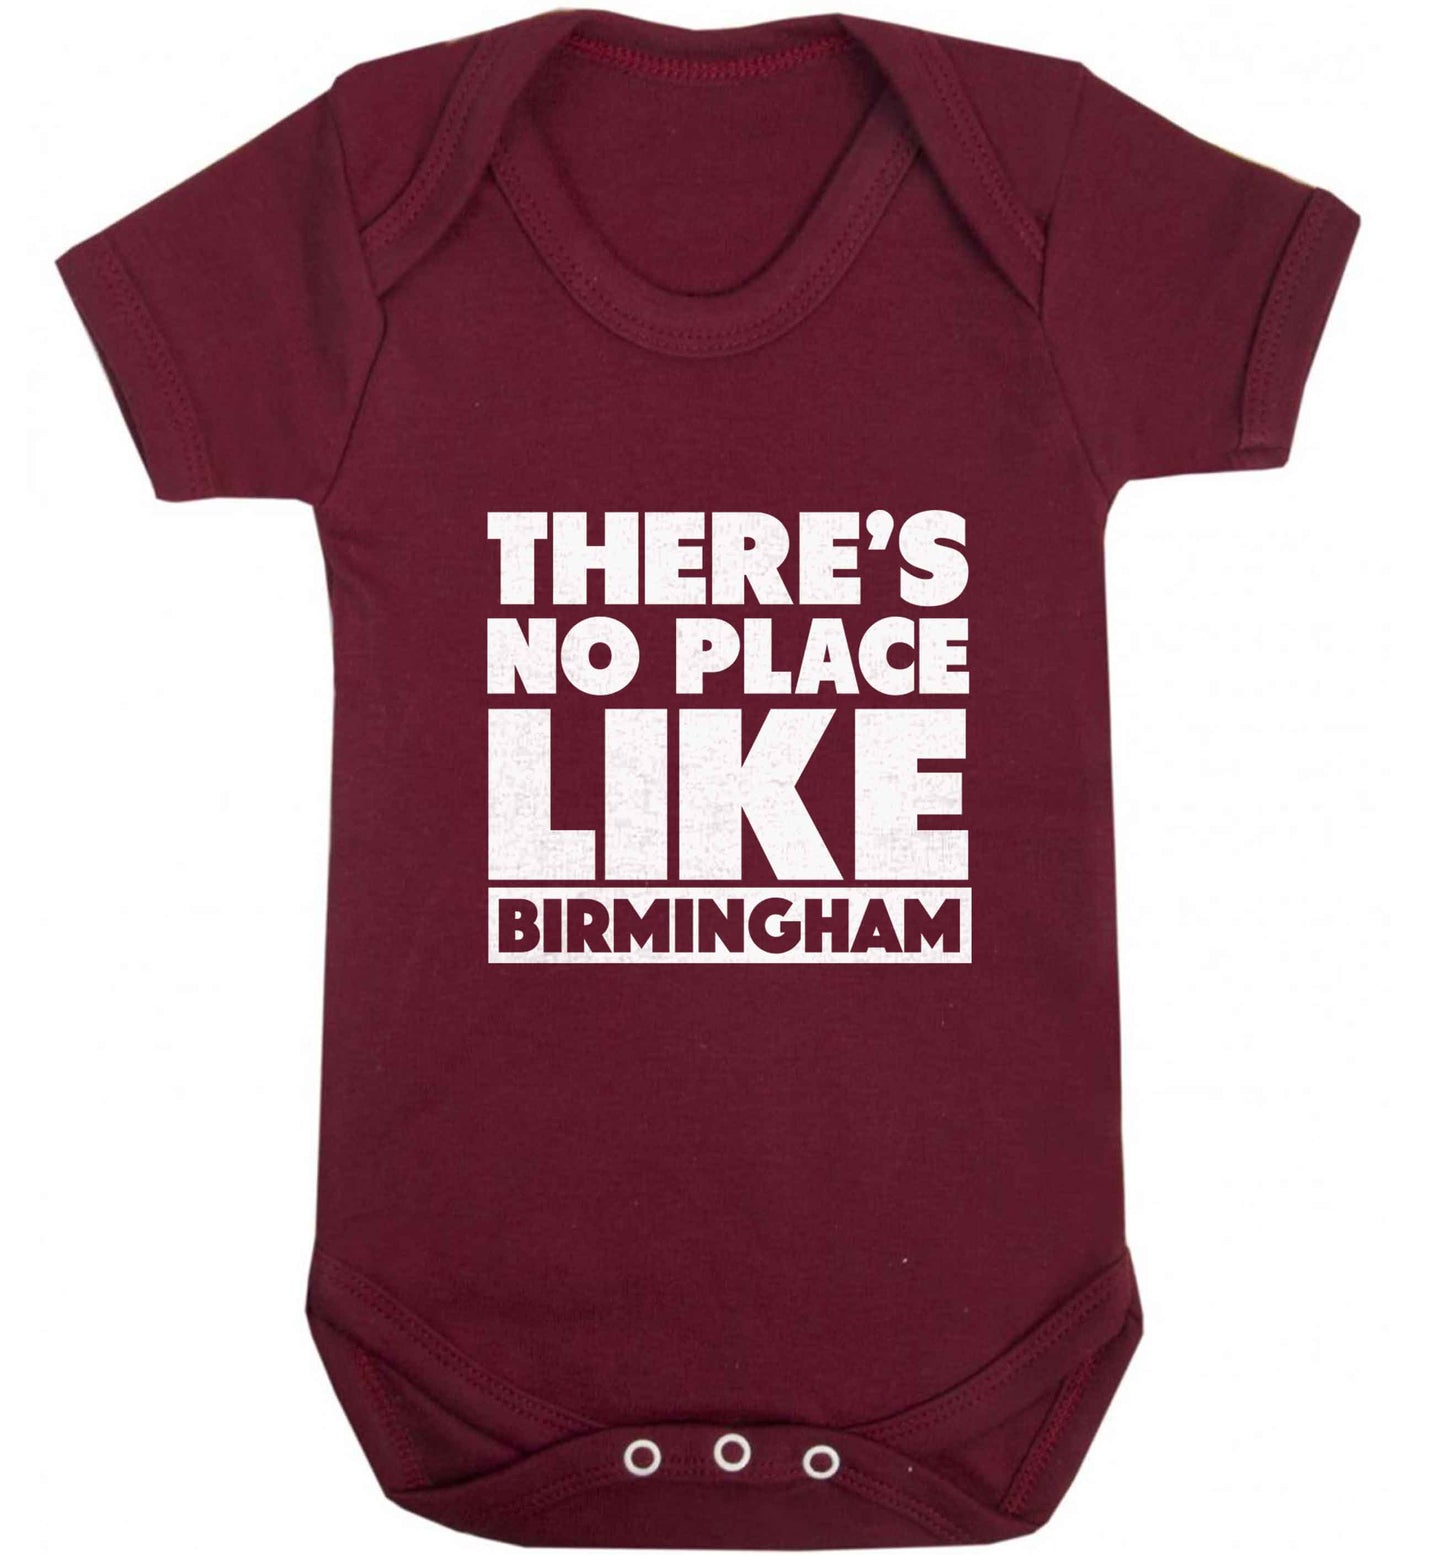 There's no place like Birmingham baby vest maroon 18-24 months